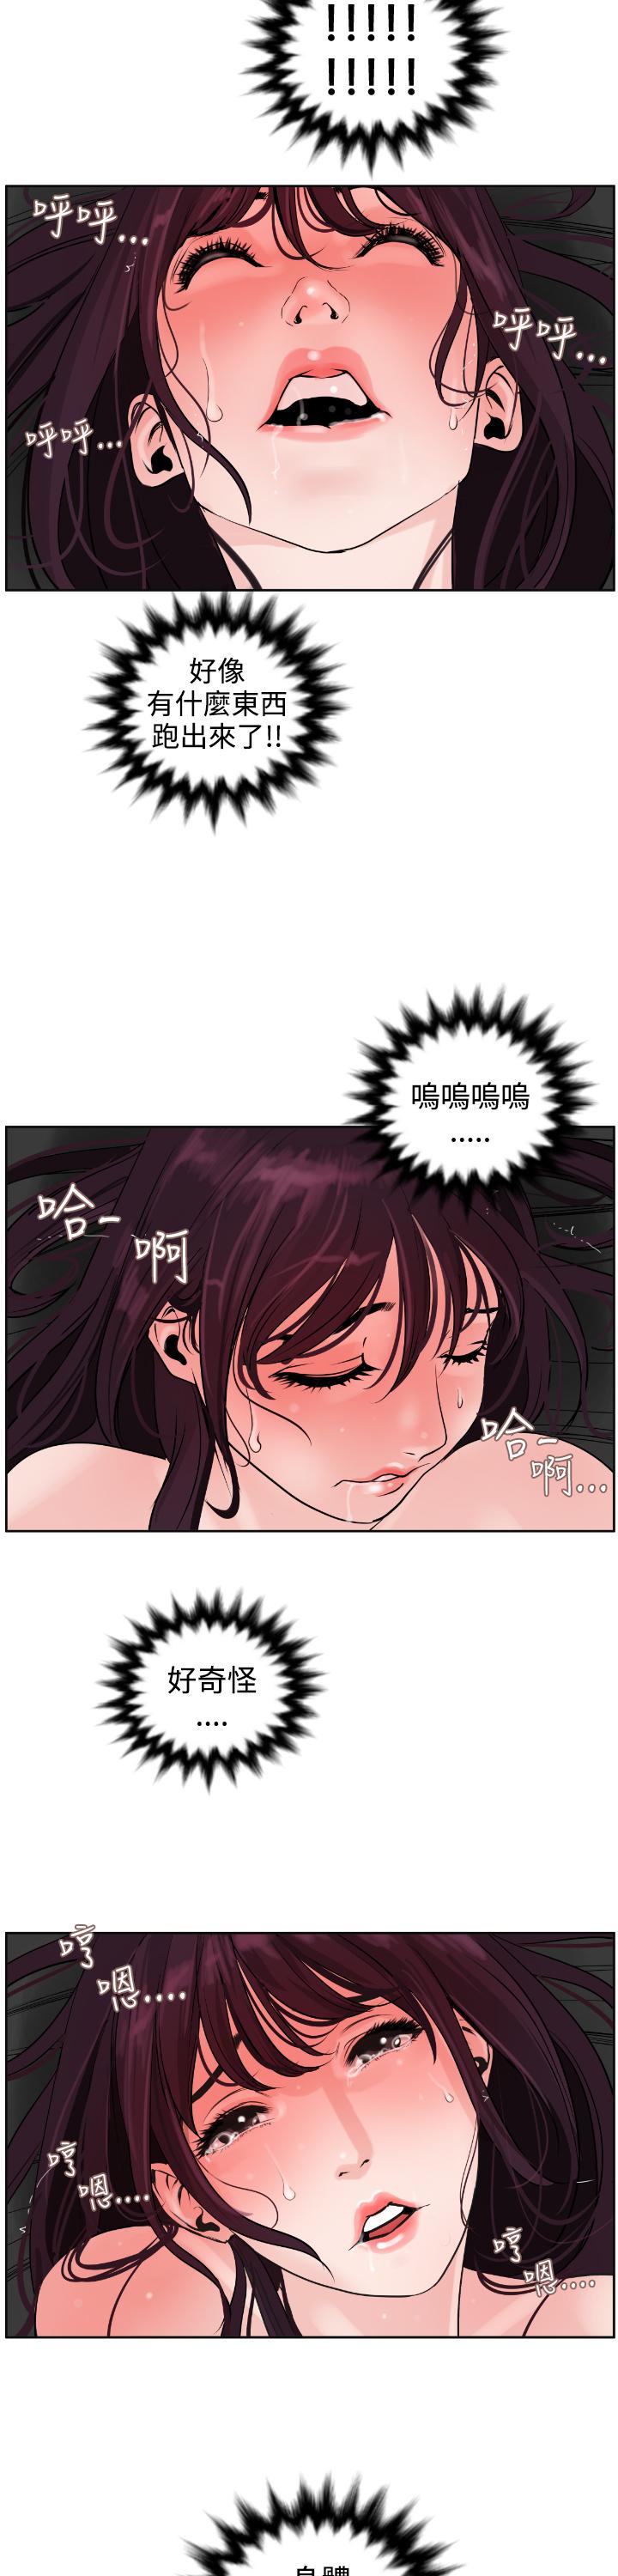 Desire King (慾求王) Ch.1-7 (chinese) 227